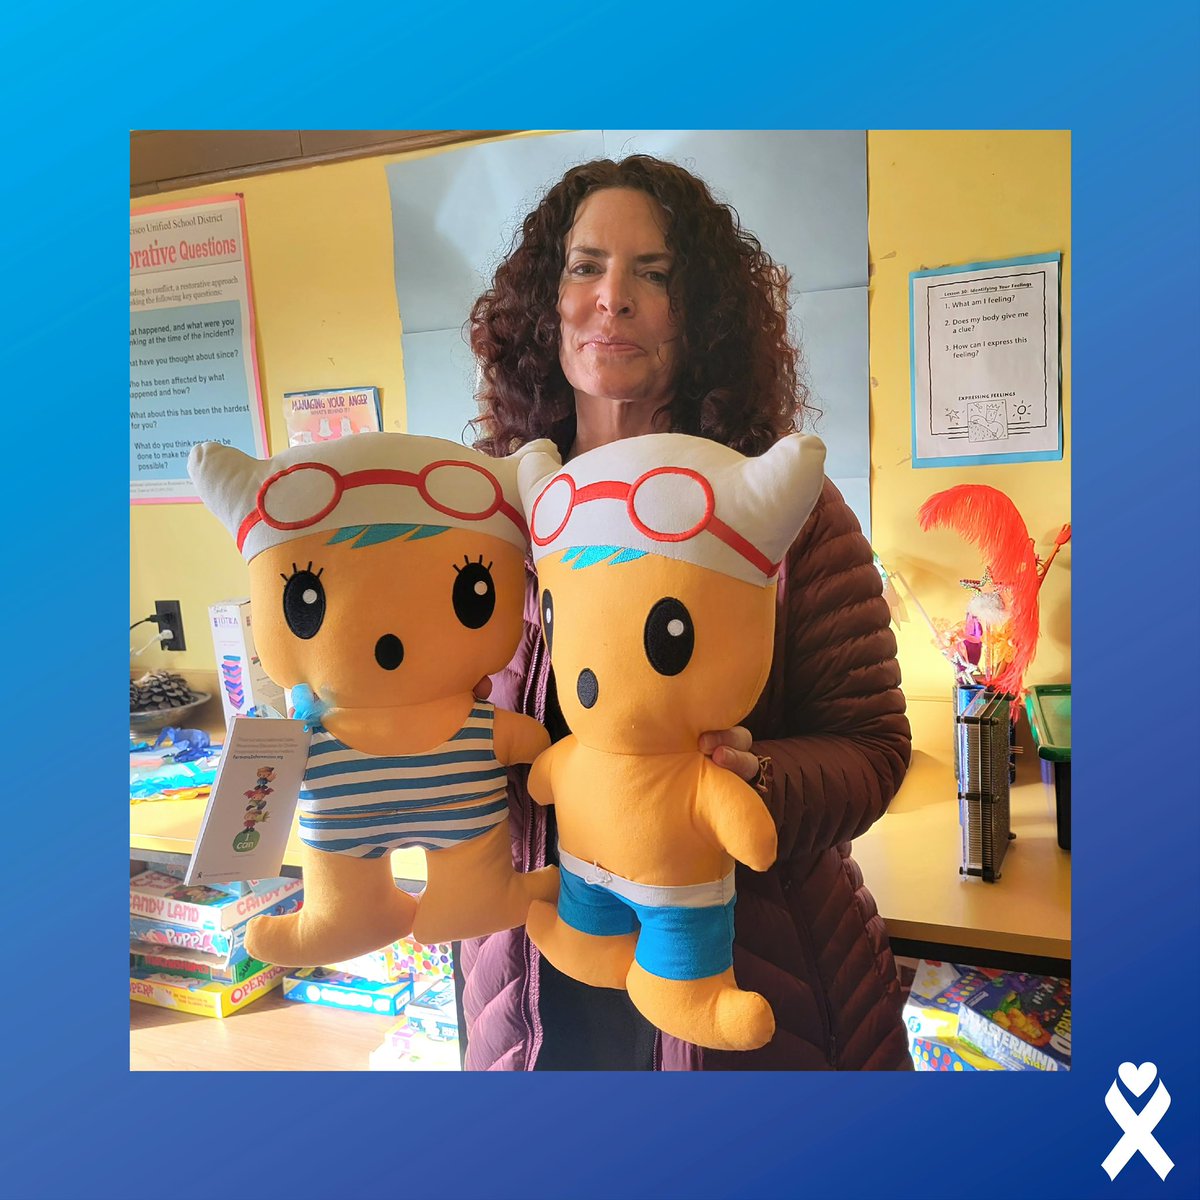 Welcome to our new partners at Sherman Elementary School! Sara, the school’s social worker, reached out to us to request a #SafetyAwarenessEducation kit! Upon receiving her kit, she said, “I feel so prepared now!”

#childabuseprevention #educationisprevention #keepkidssafe